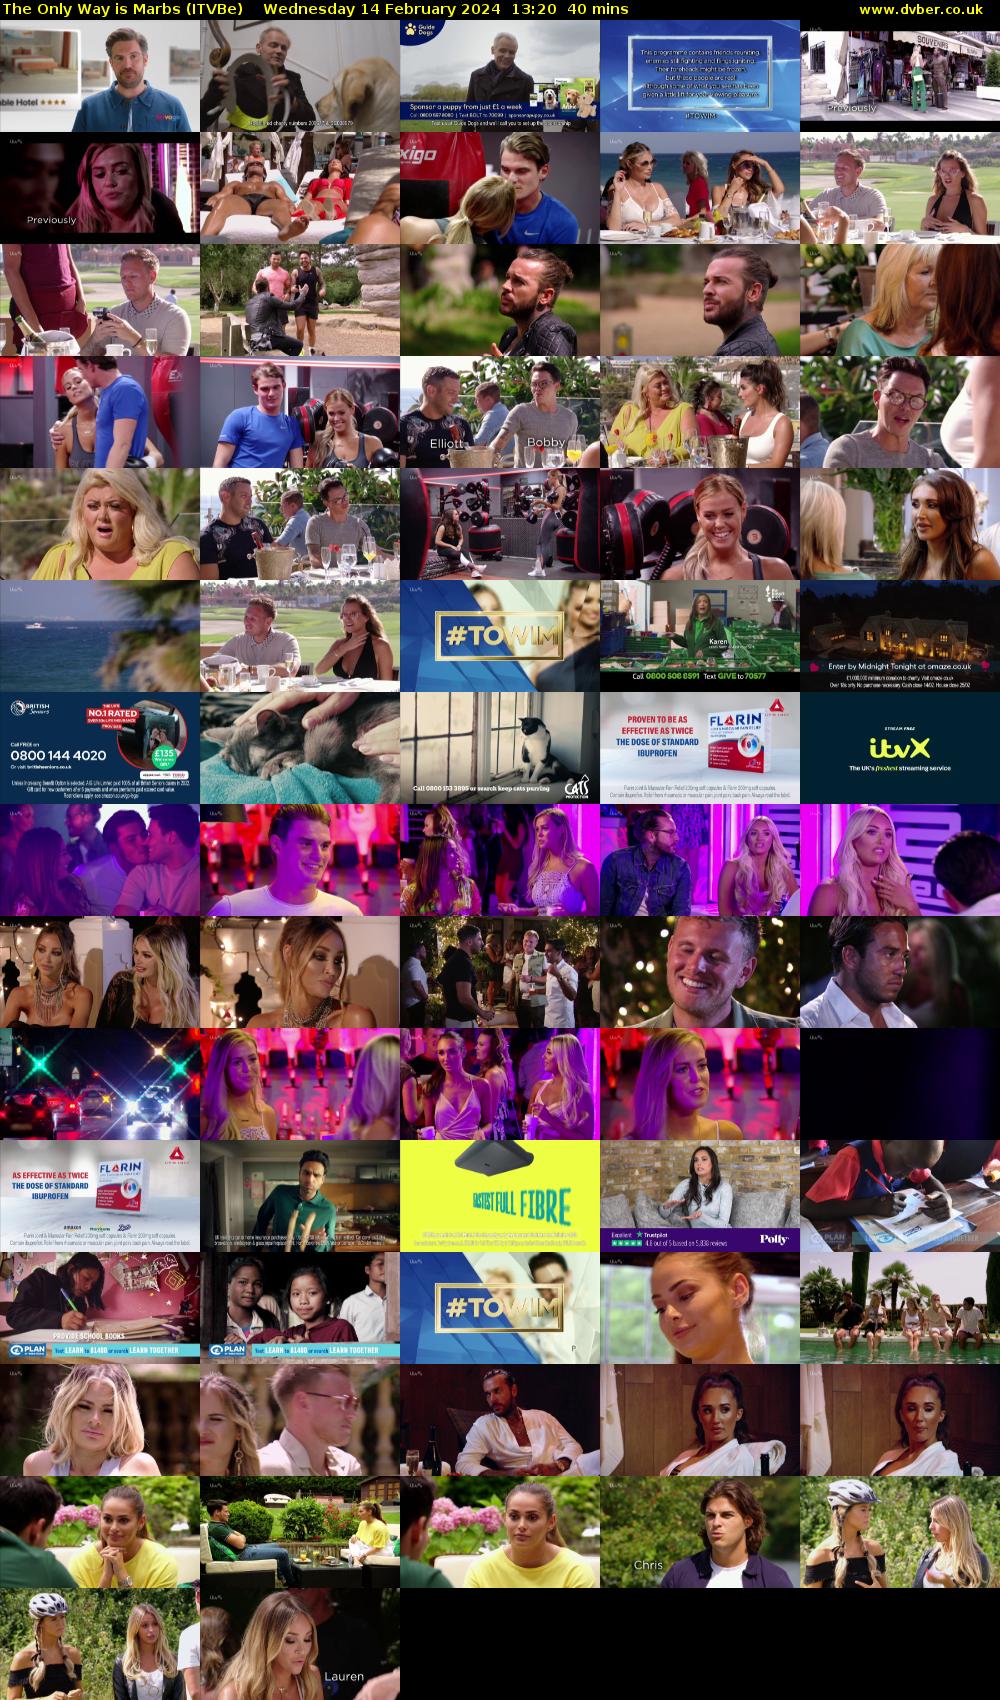 The Only Way is Marbs (ITVBe) Wednesday 14 February 2024 13:20 - 14:00